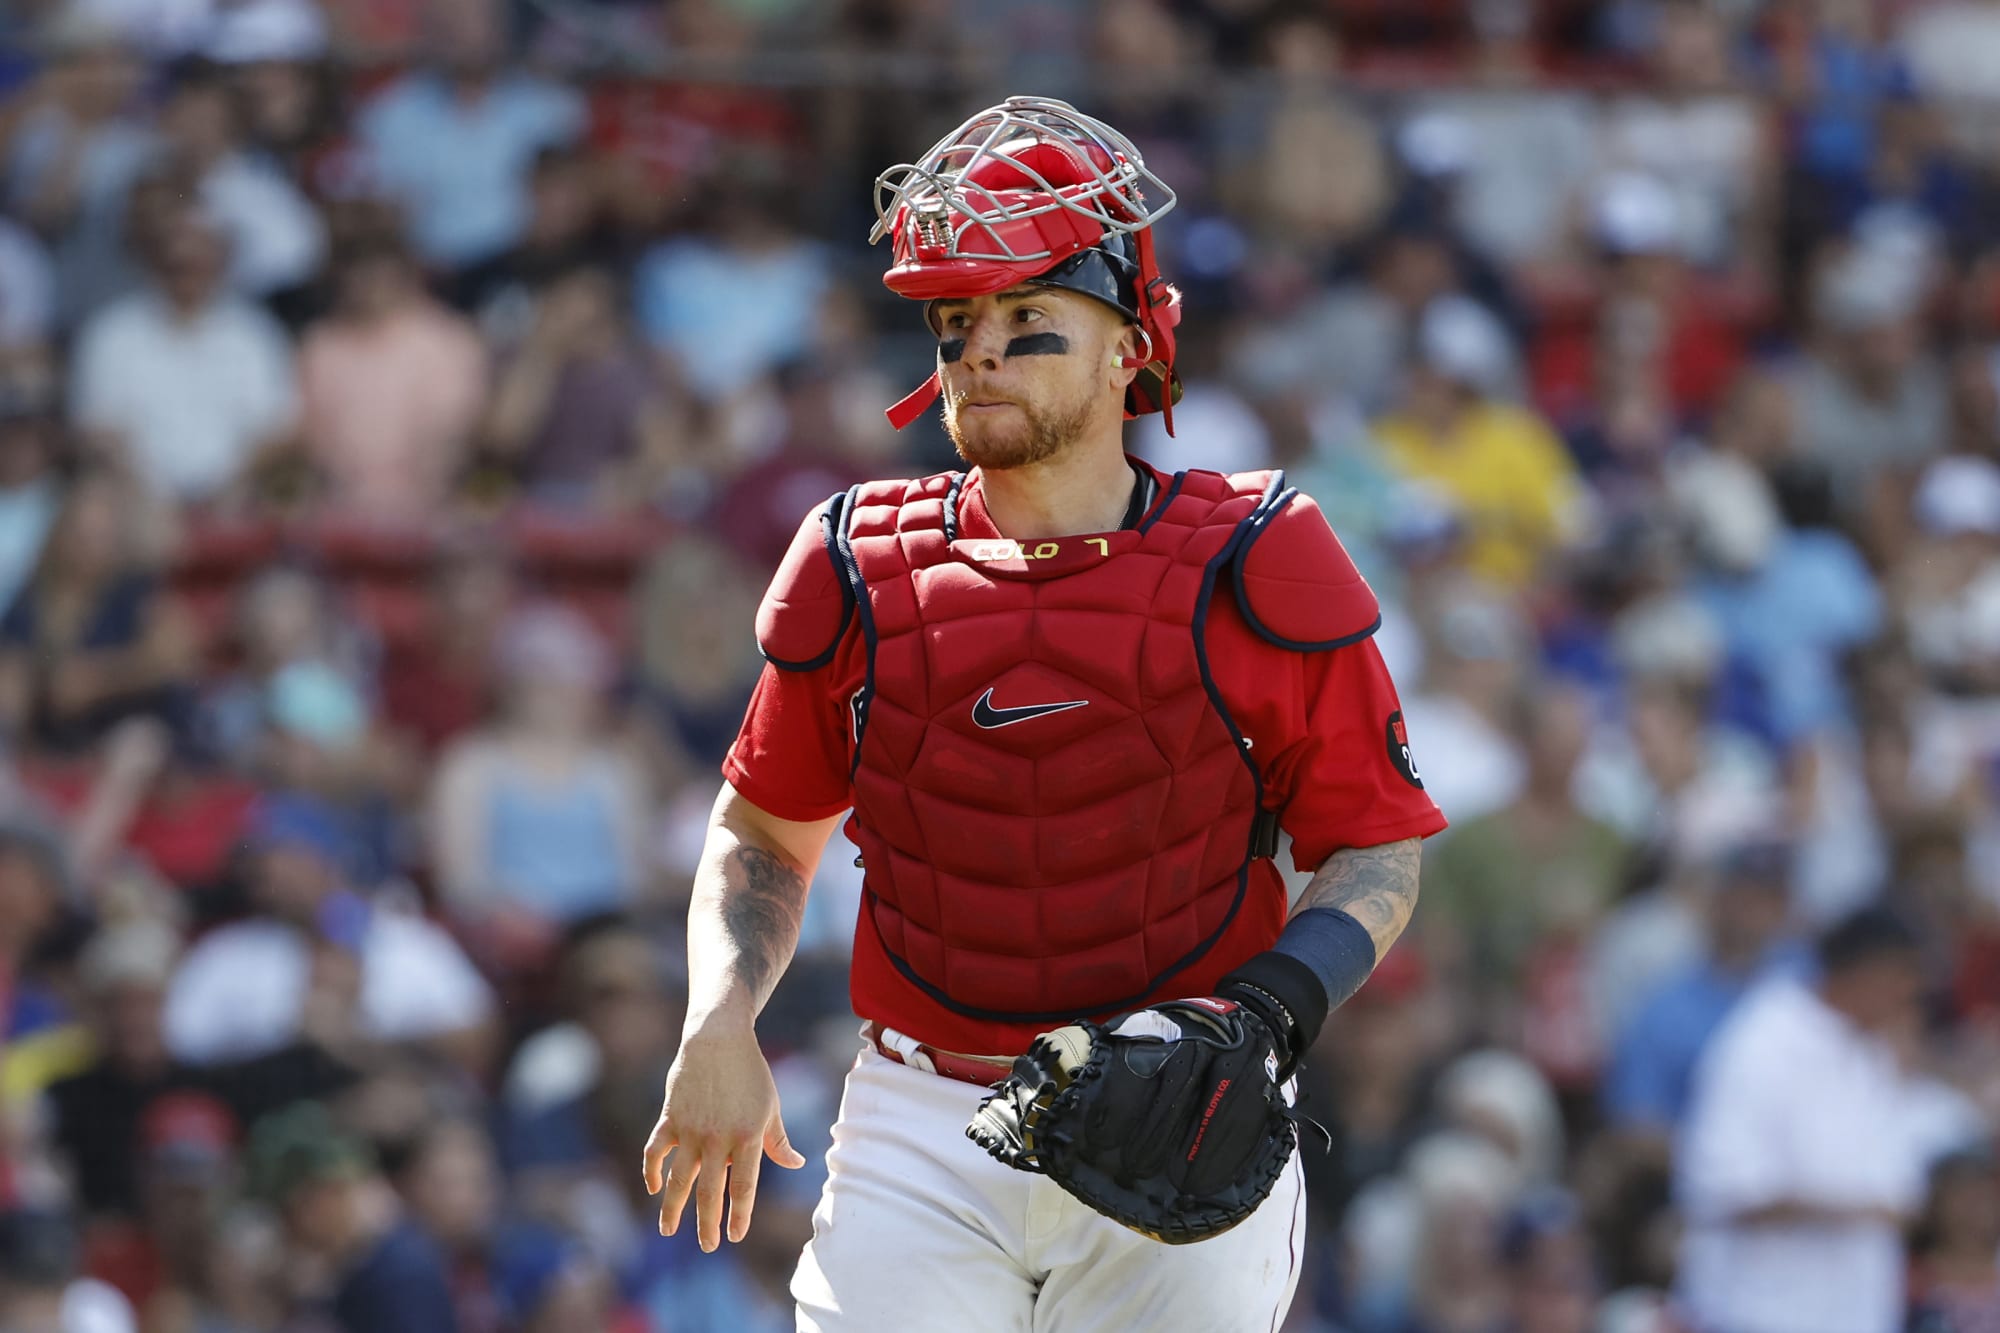 Report: Red Sox acquire catcher Reese McGuire from White Sox - CBS Boston